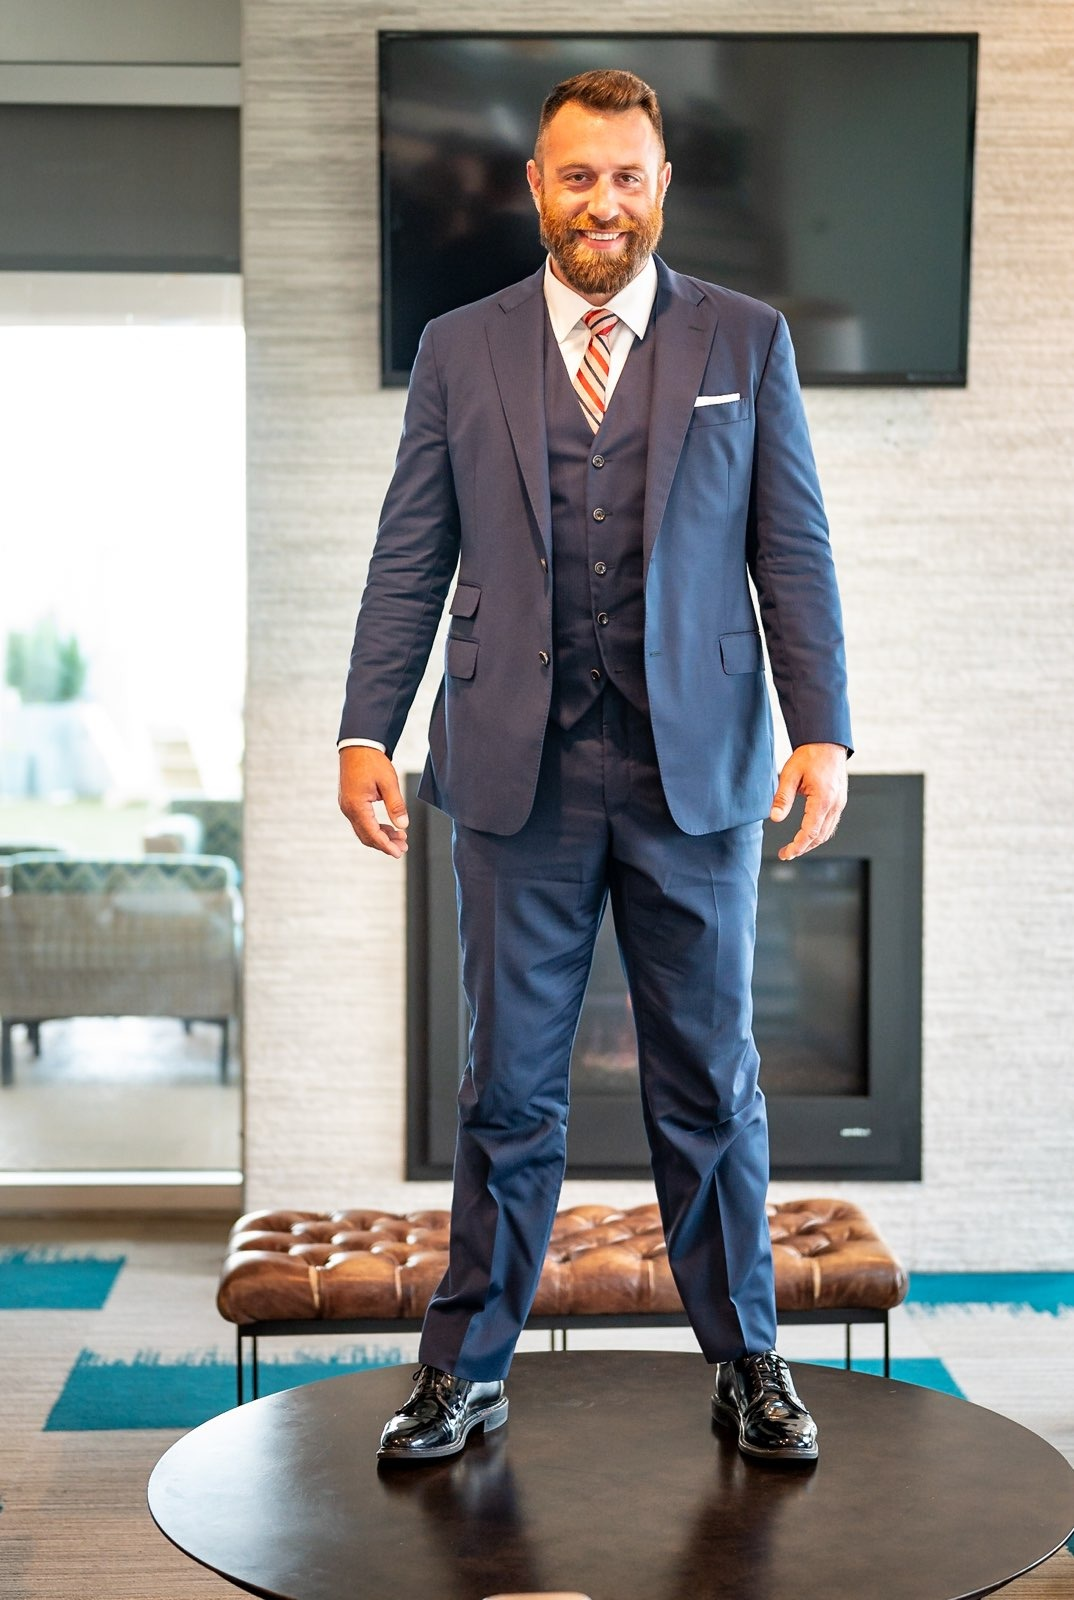 Business Management Expert, wearing a grey suit from Team Addo. Michael J. Penny